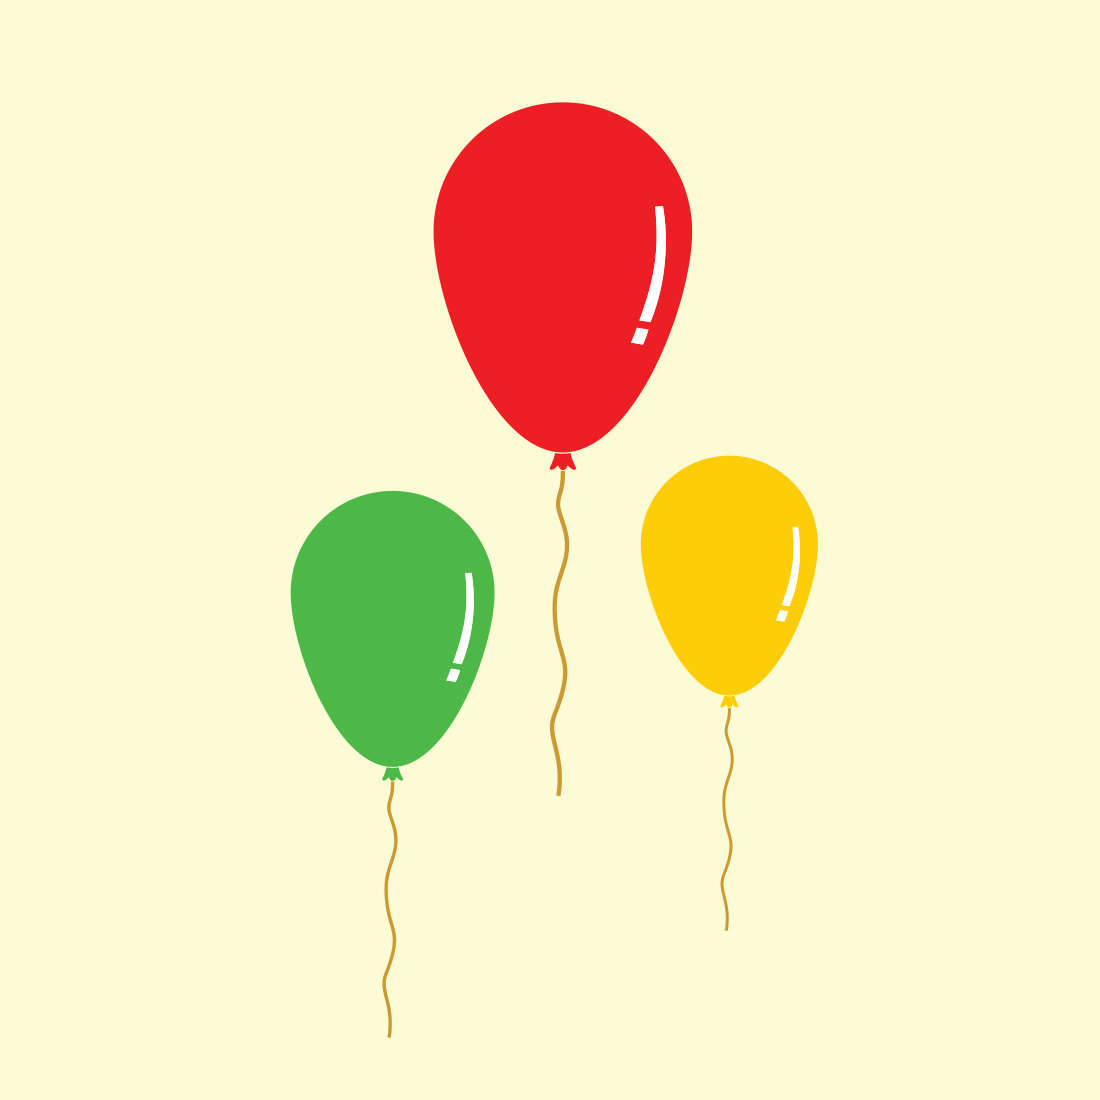 Three balloons preview image.